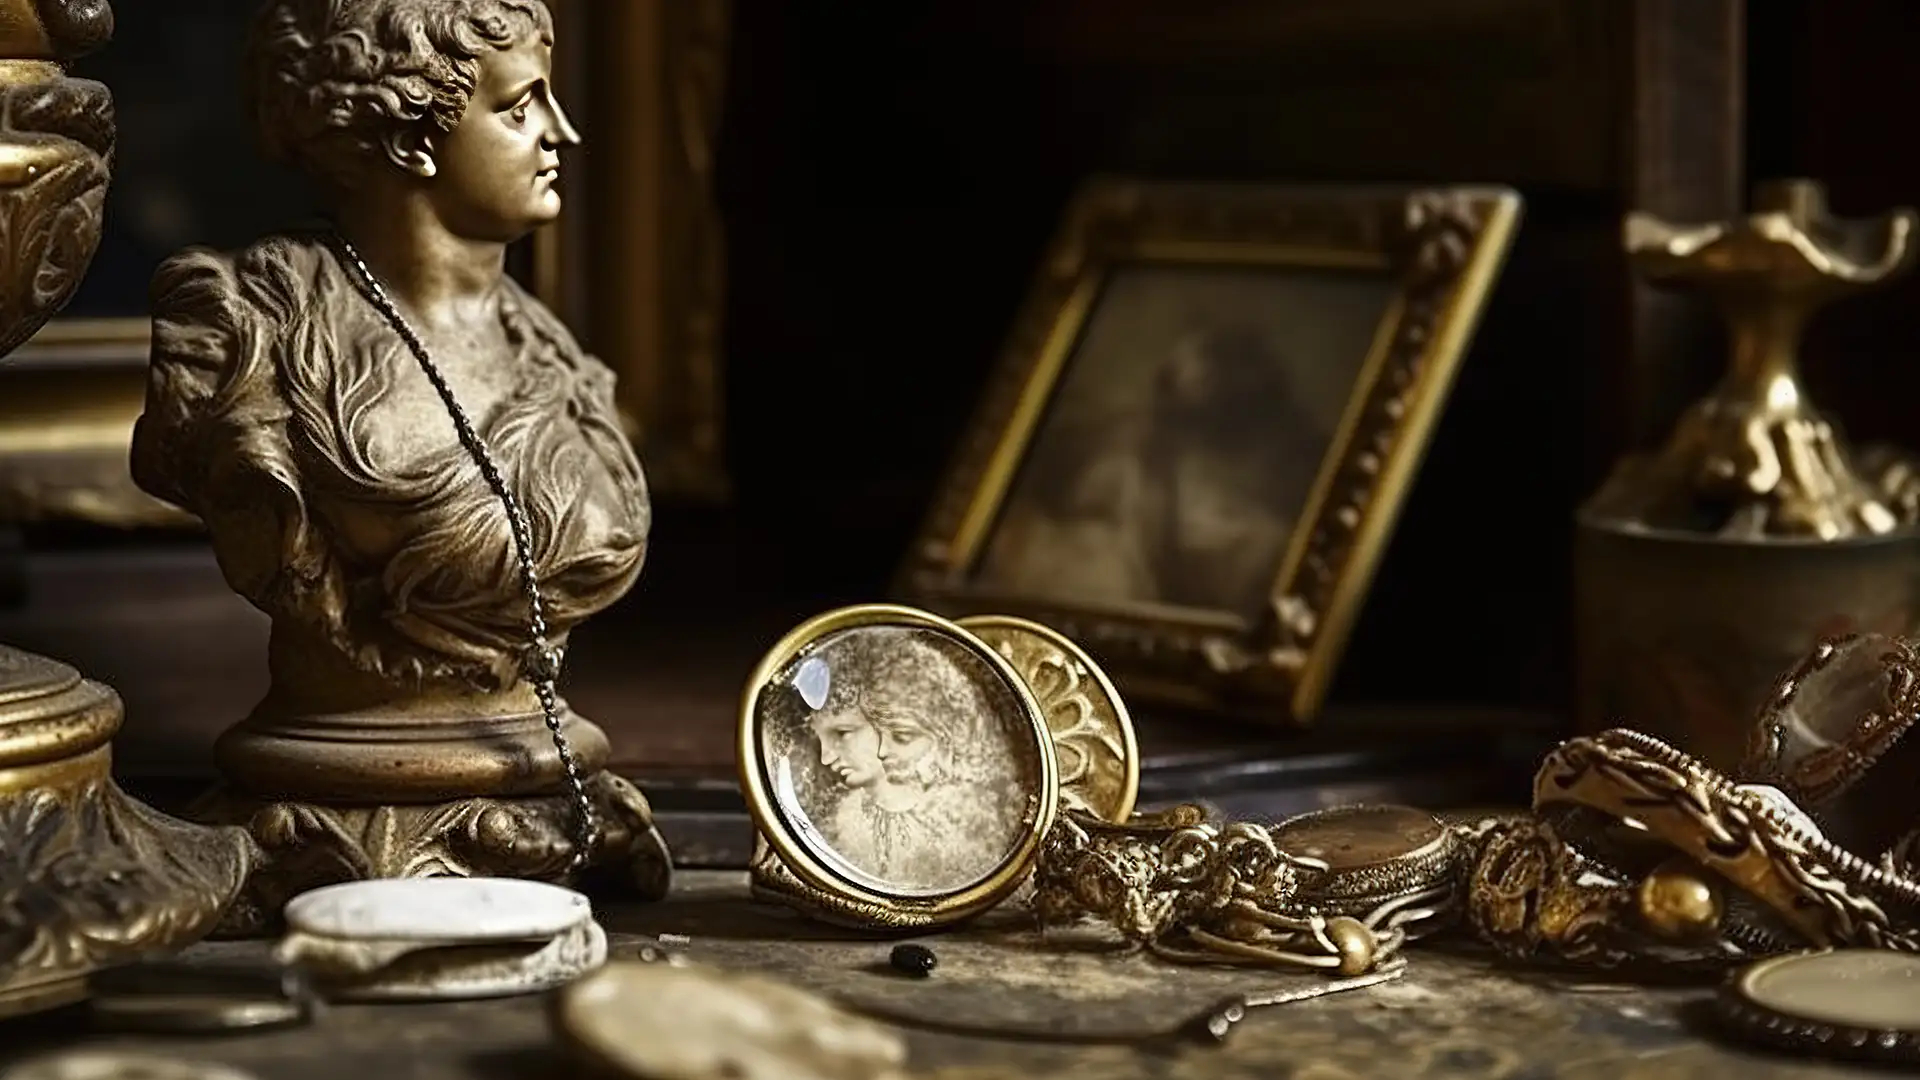 Get Top Dollar for Your Antique Art: Tips for Appraising and Selling